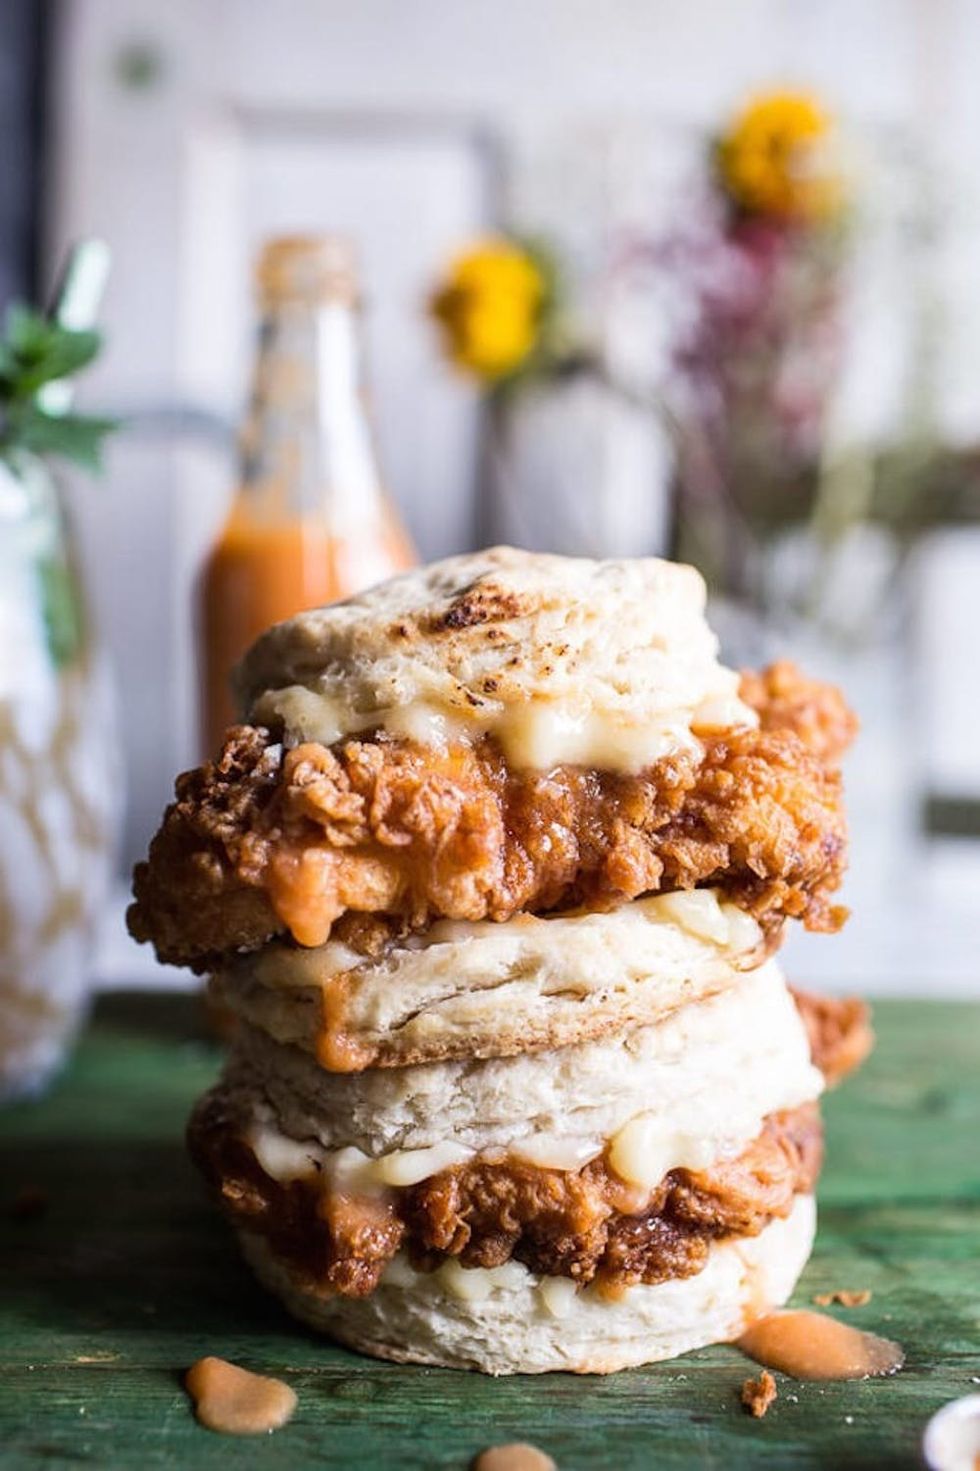 Buttermilk Chicken Biscuit With Habanero Peach Hot Sauce and Honey Butter